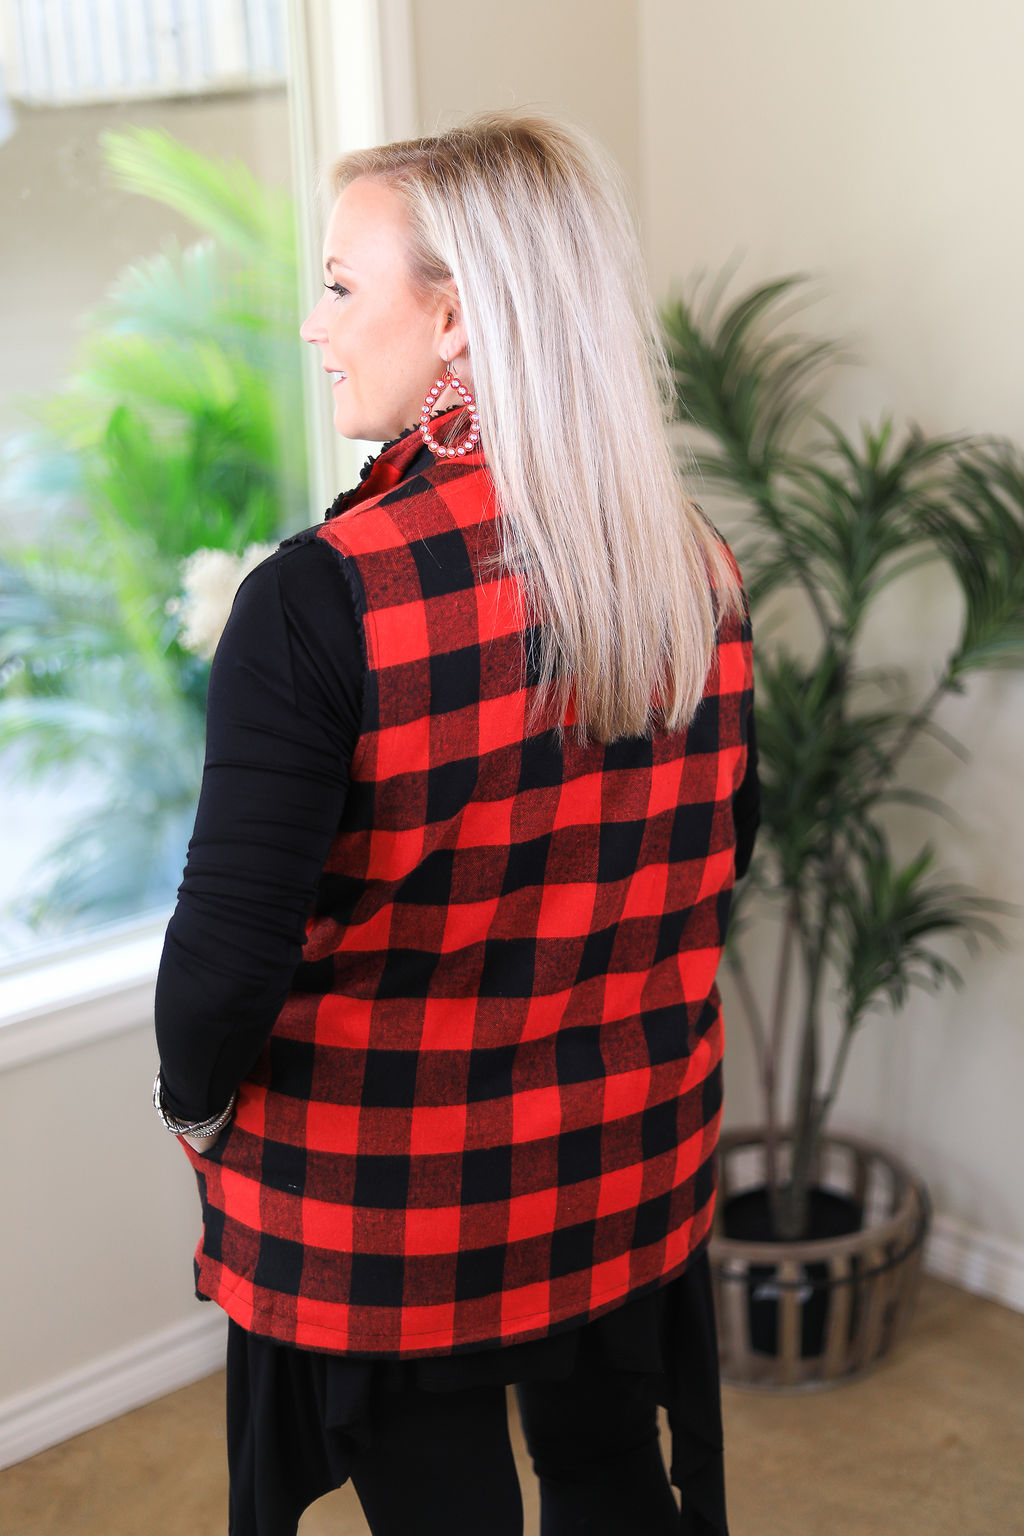 Meet Me In Aspen Buffalo Plaid Sherpa Lined Zip Up Vest in Red - Giddy Up Glamour Boutique